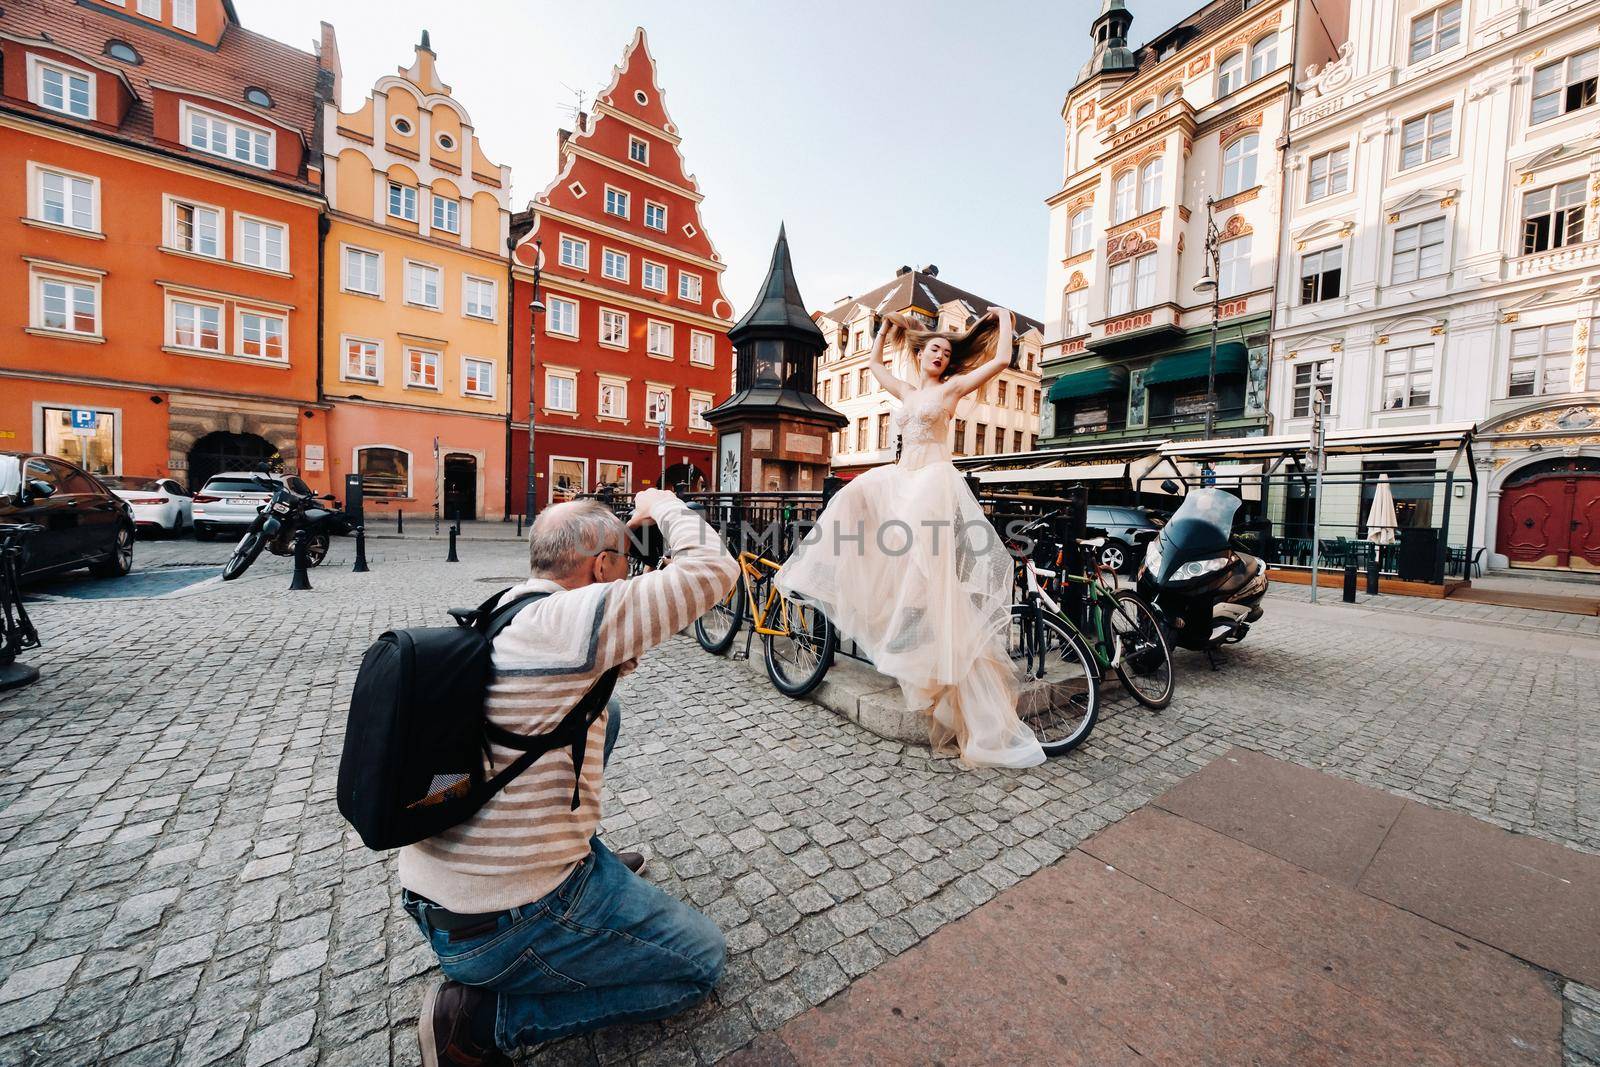 a photographer photographs a Bride in a wedding dress with long hair in the Old town of Wroclaw. Wedding photo shoot in the center of an old Polish city.Wroclaw, Poland.